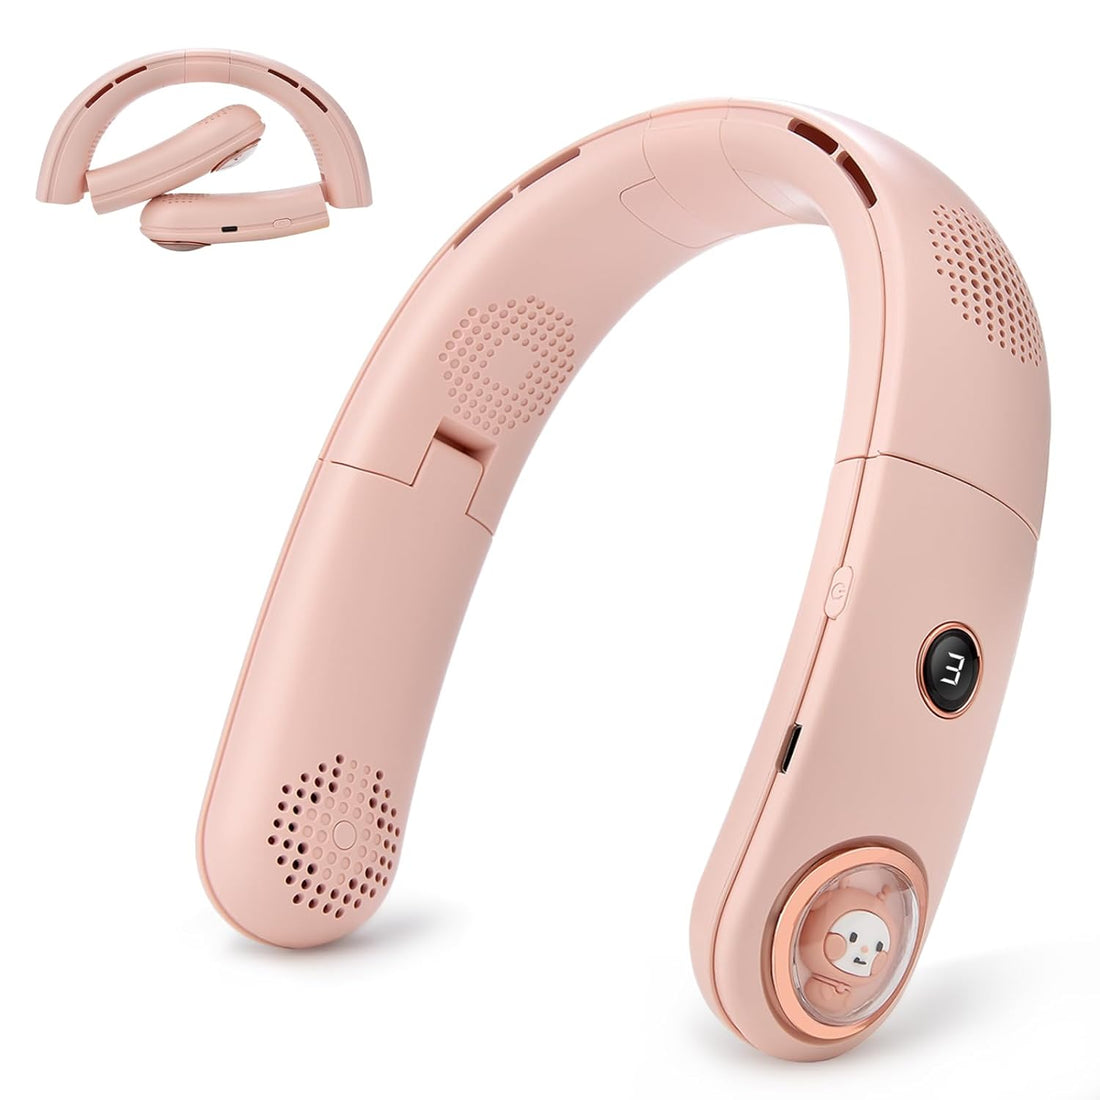 RUIOMII Neck Fans Portable Rechargeable Personal Fans for Your Neck 360° Cooling 3600 mAh Ultra-long Battery Life 3 Speeds Low-Noise Hand-Free Beat the Hot Foldable Neck Fans Pink